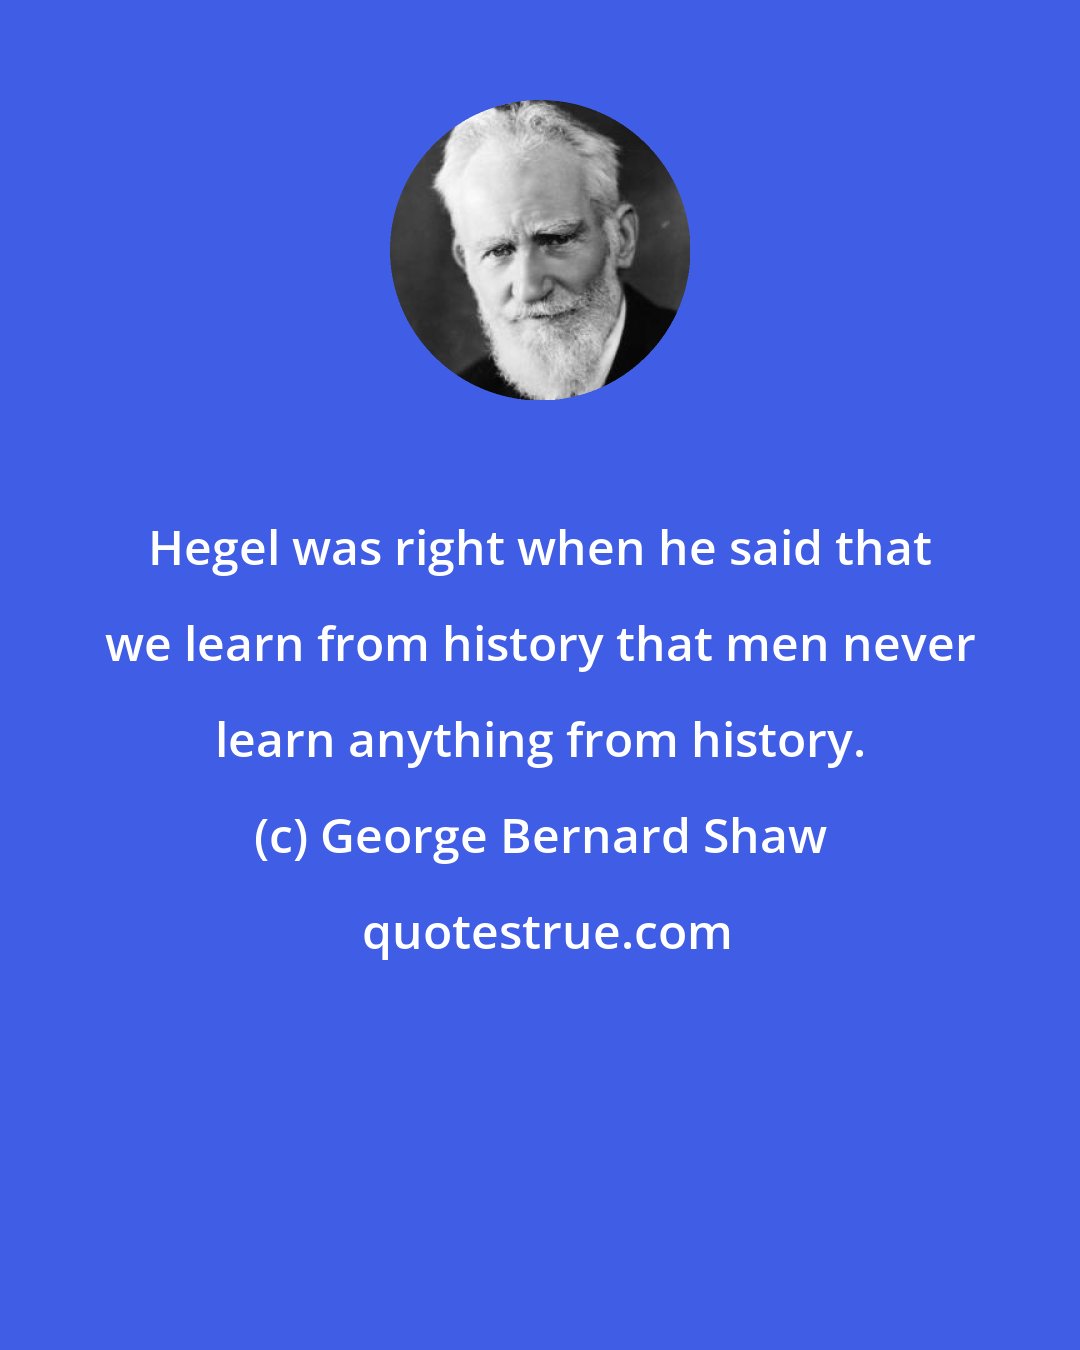 George Bernard Shaw: Hegel was right when he said that we learn from history that men never learn anything from history.